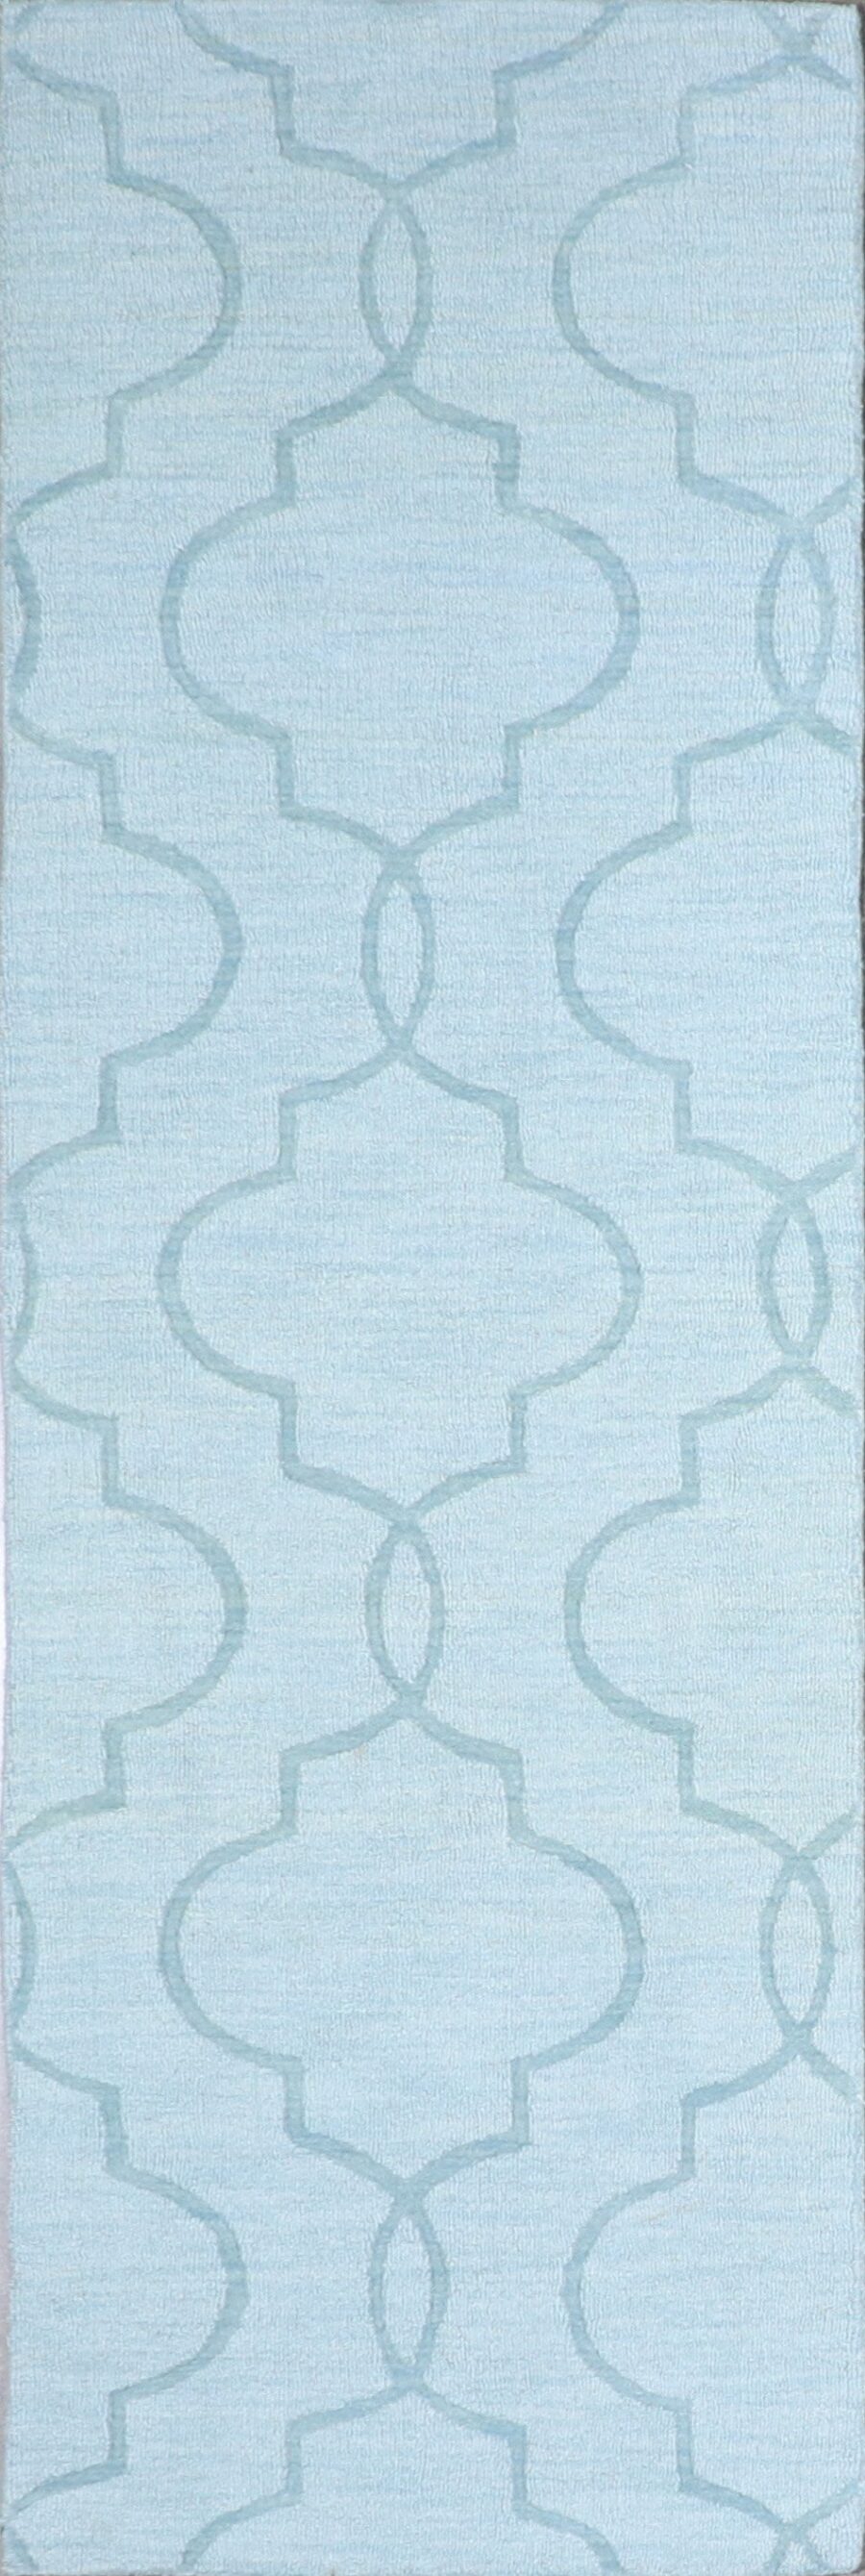 2'6"x7'10" Decorative Wool Hand-Tufted Rug - Direct Rug Import | Rugs in Chicago, Indiana,South Bend,Granger